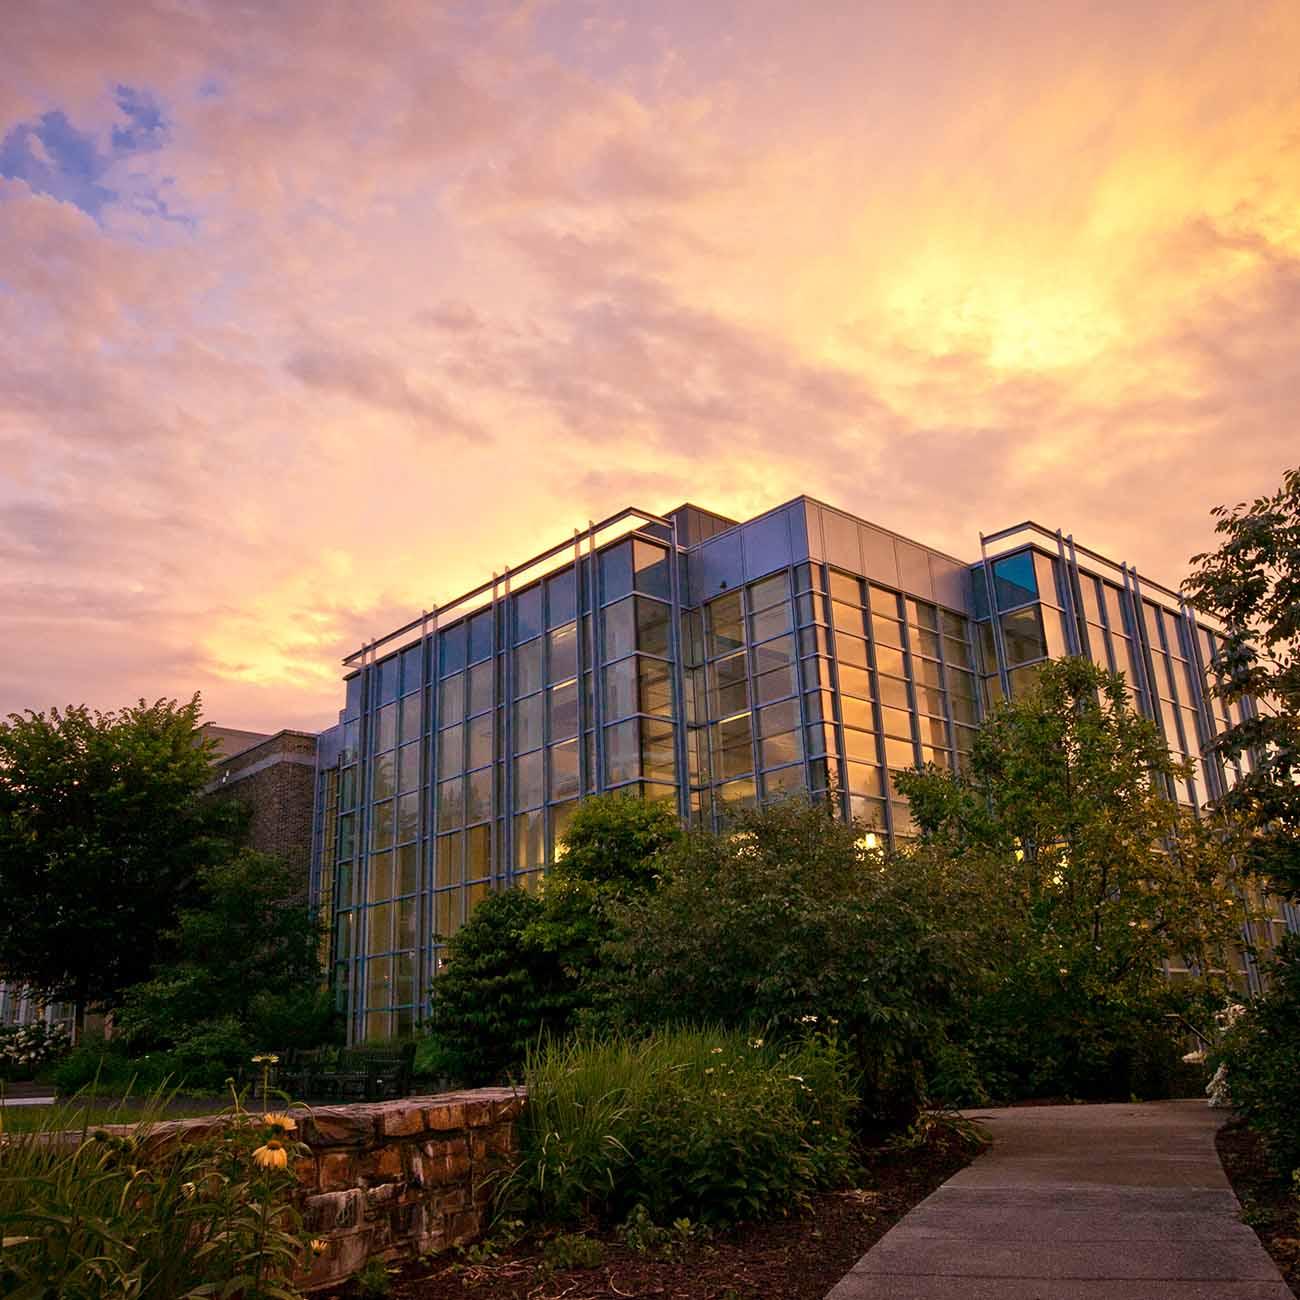 A photo of the Duke Law building at sunset.